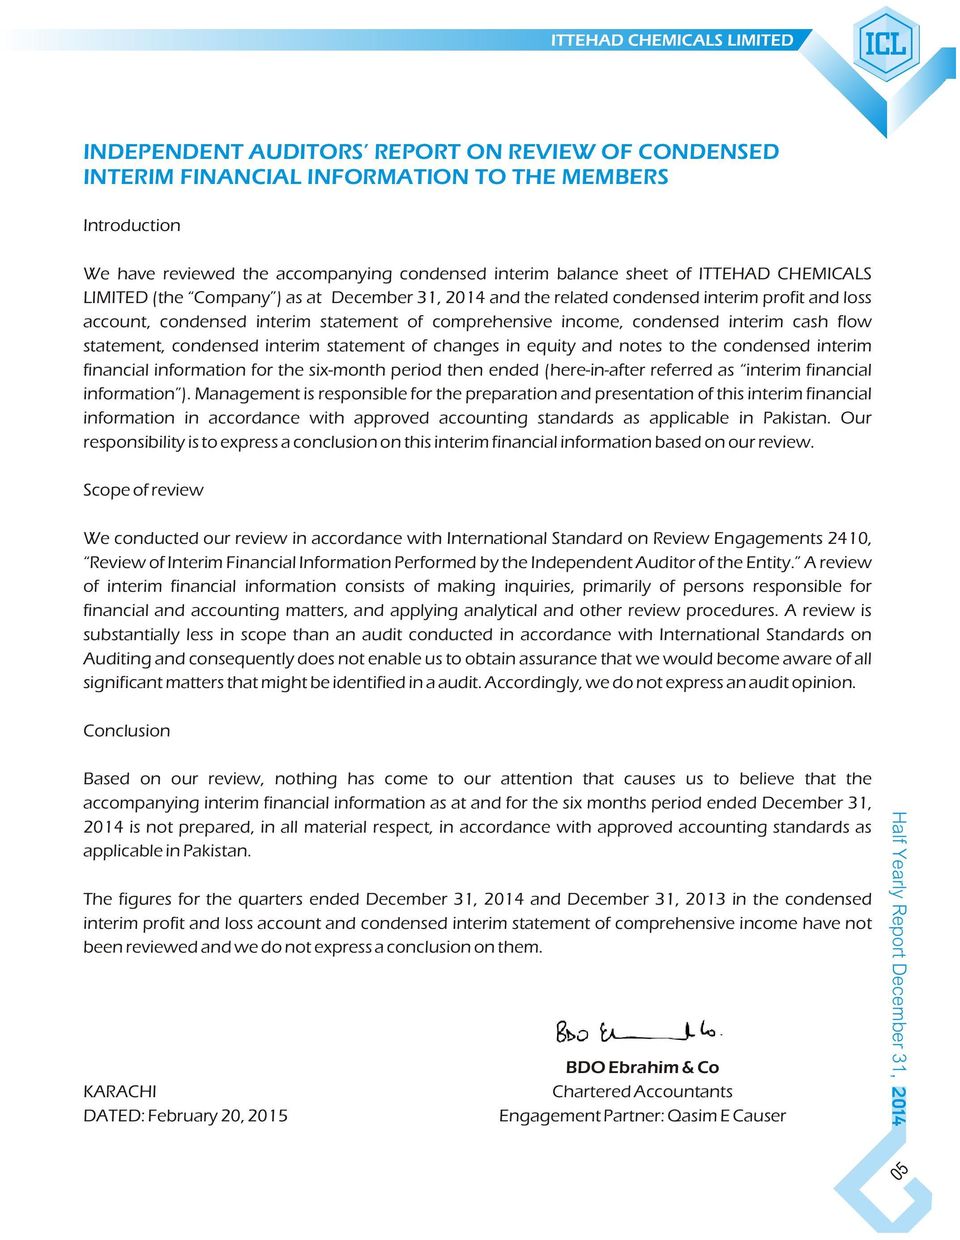 statement of changes in equity and notes to the condensed interim financial information for the six-month period then ended (here-in-after referred as interim financial information ).